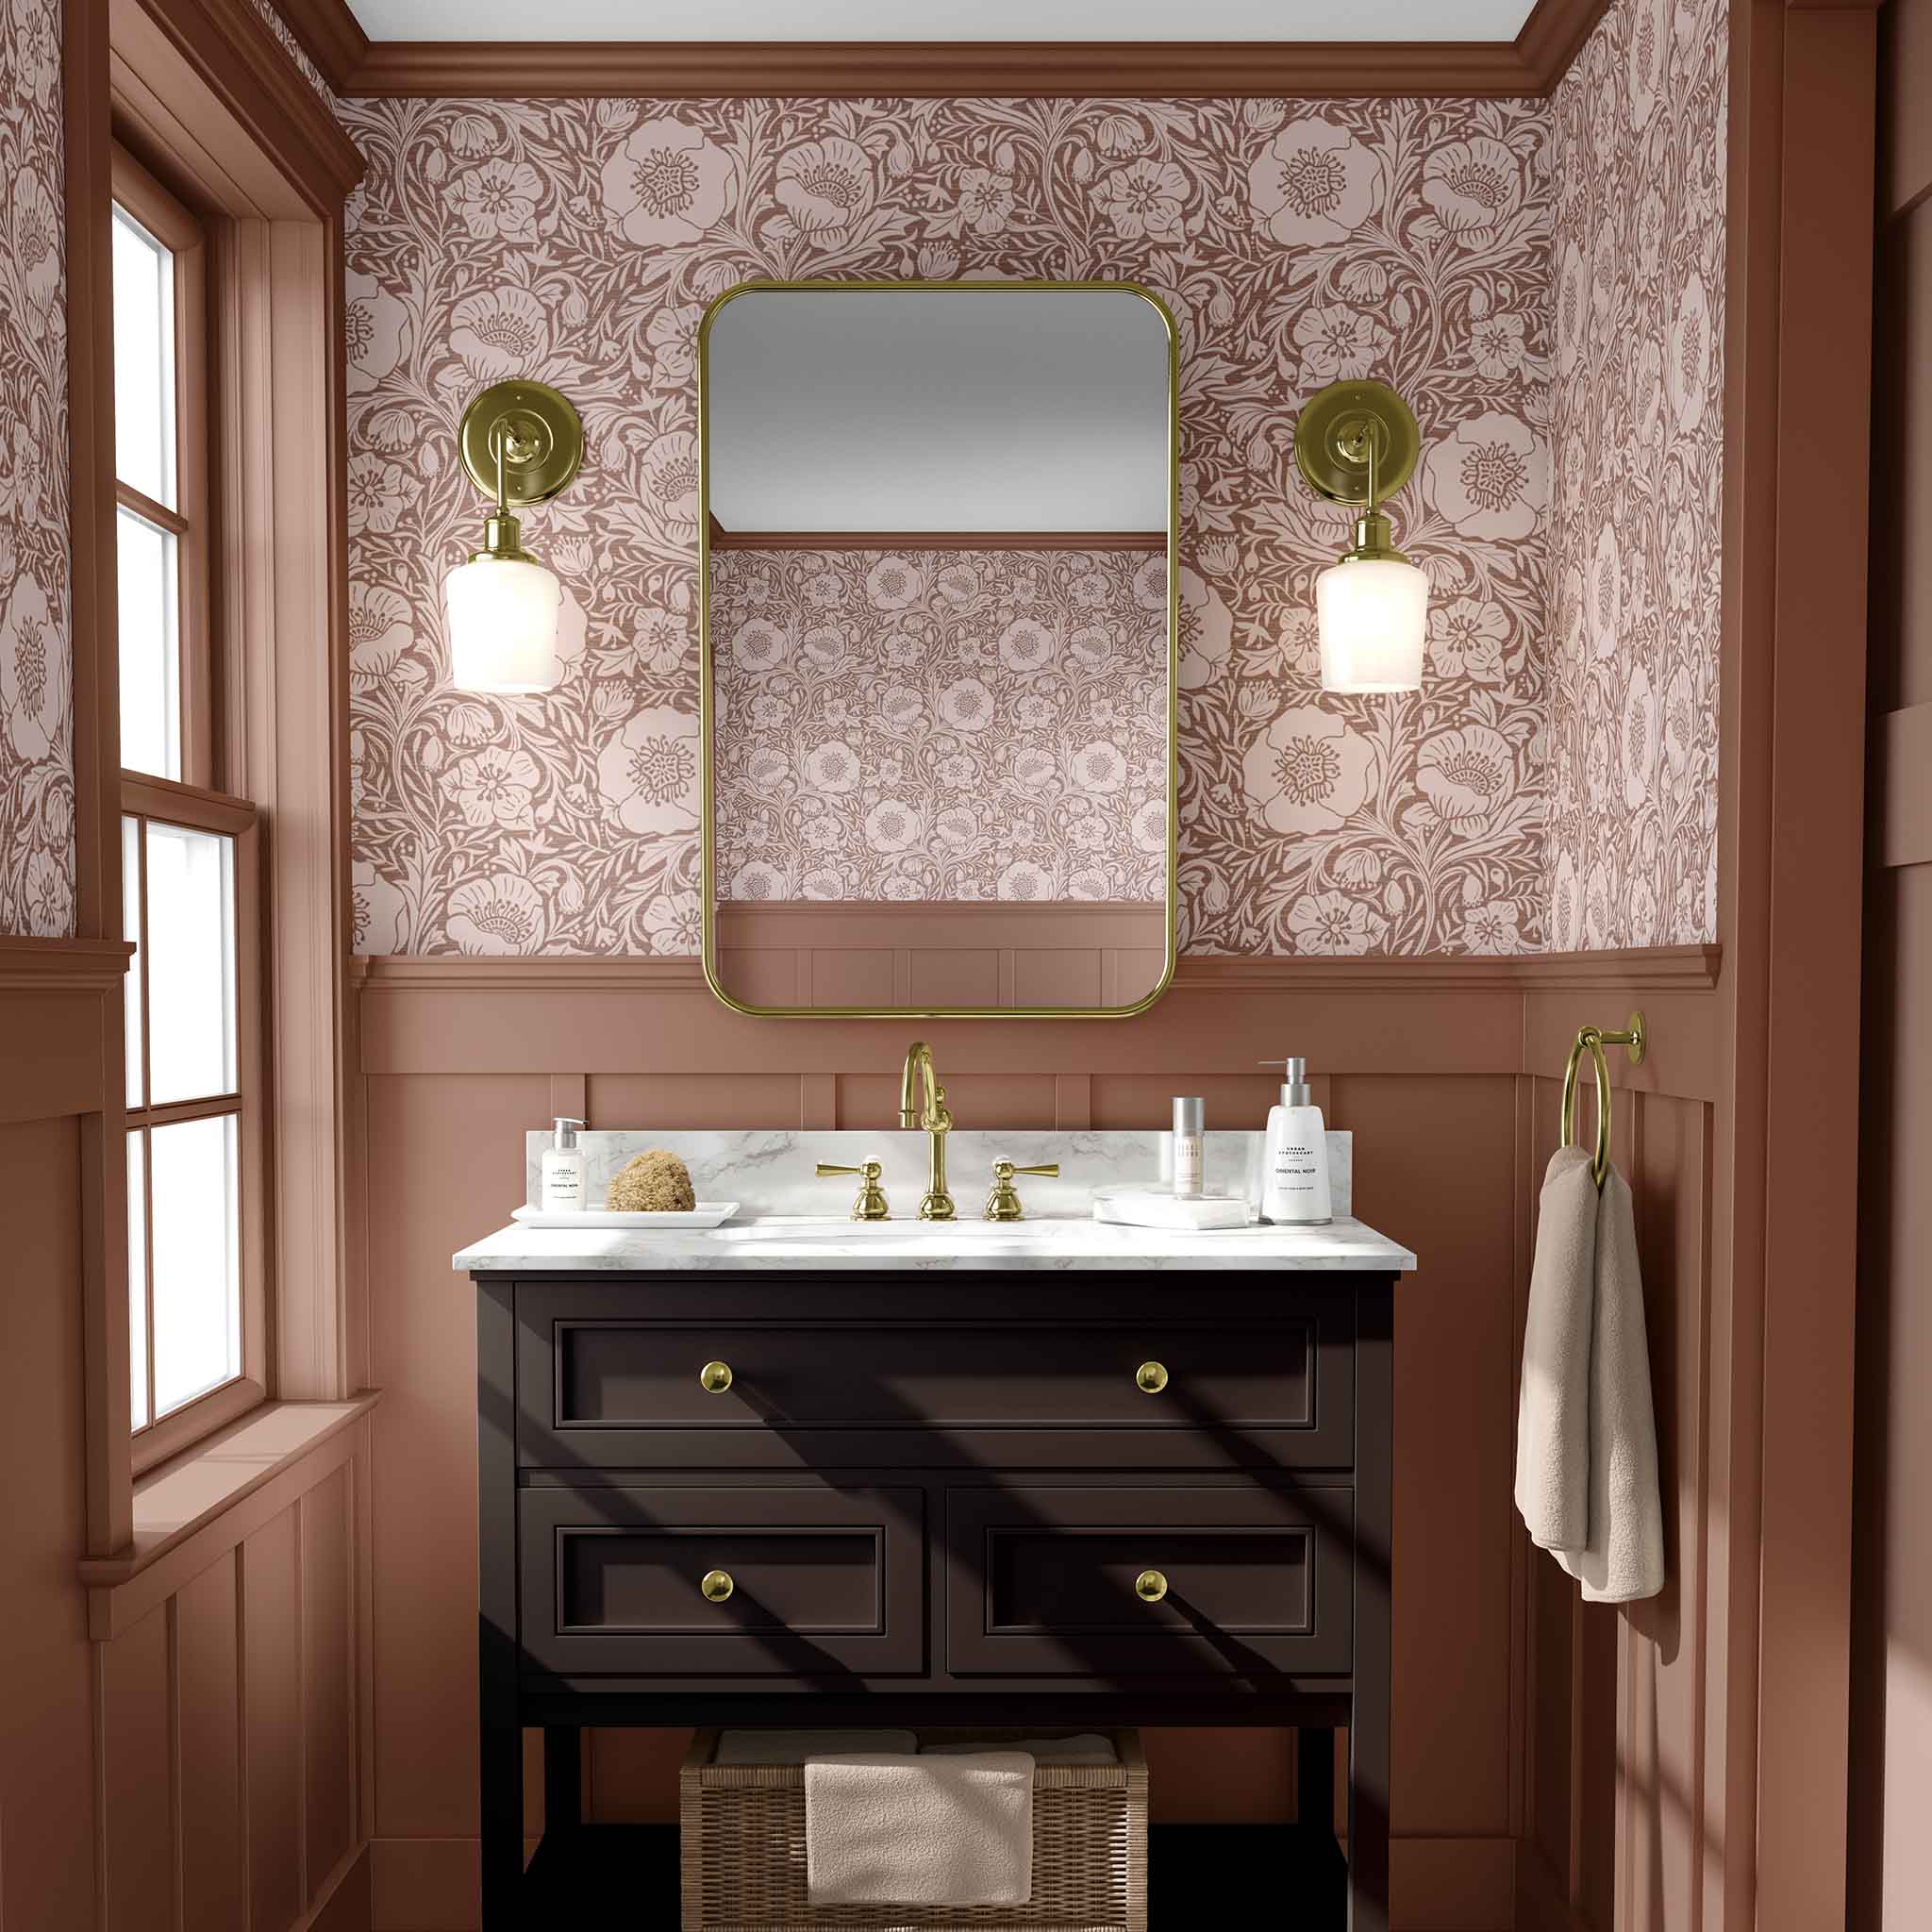 Poppy on Brown Pattern Pre-Pasted Removable Wallpaper is a better choice for a bathroom 